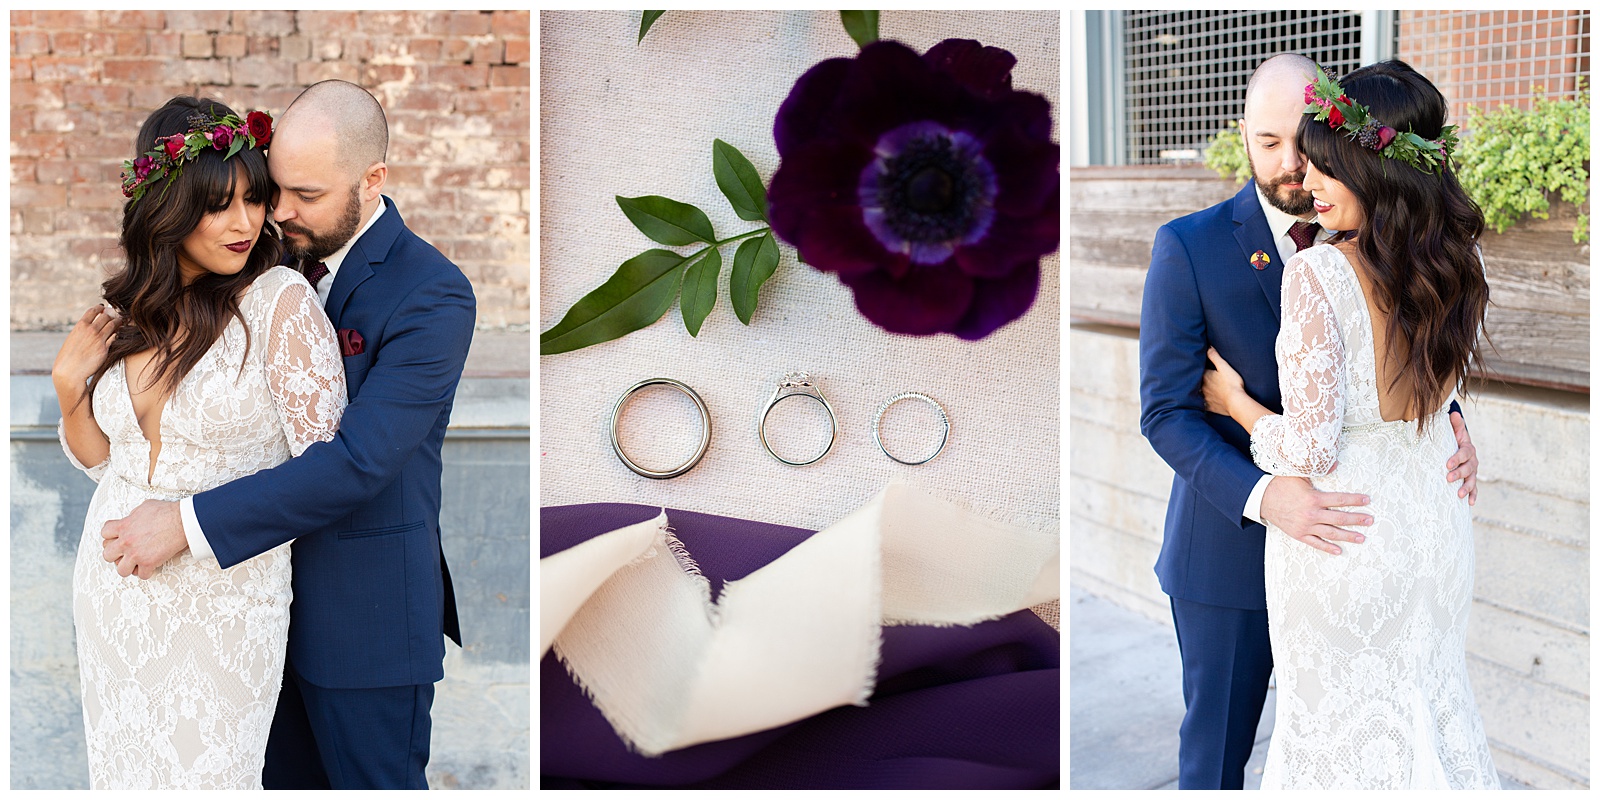 intimate wedding photography with flat lay of wedding bands - riane roberts